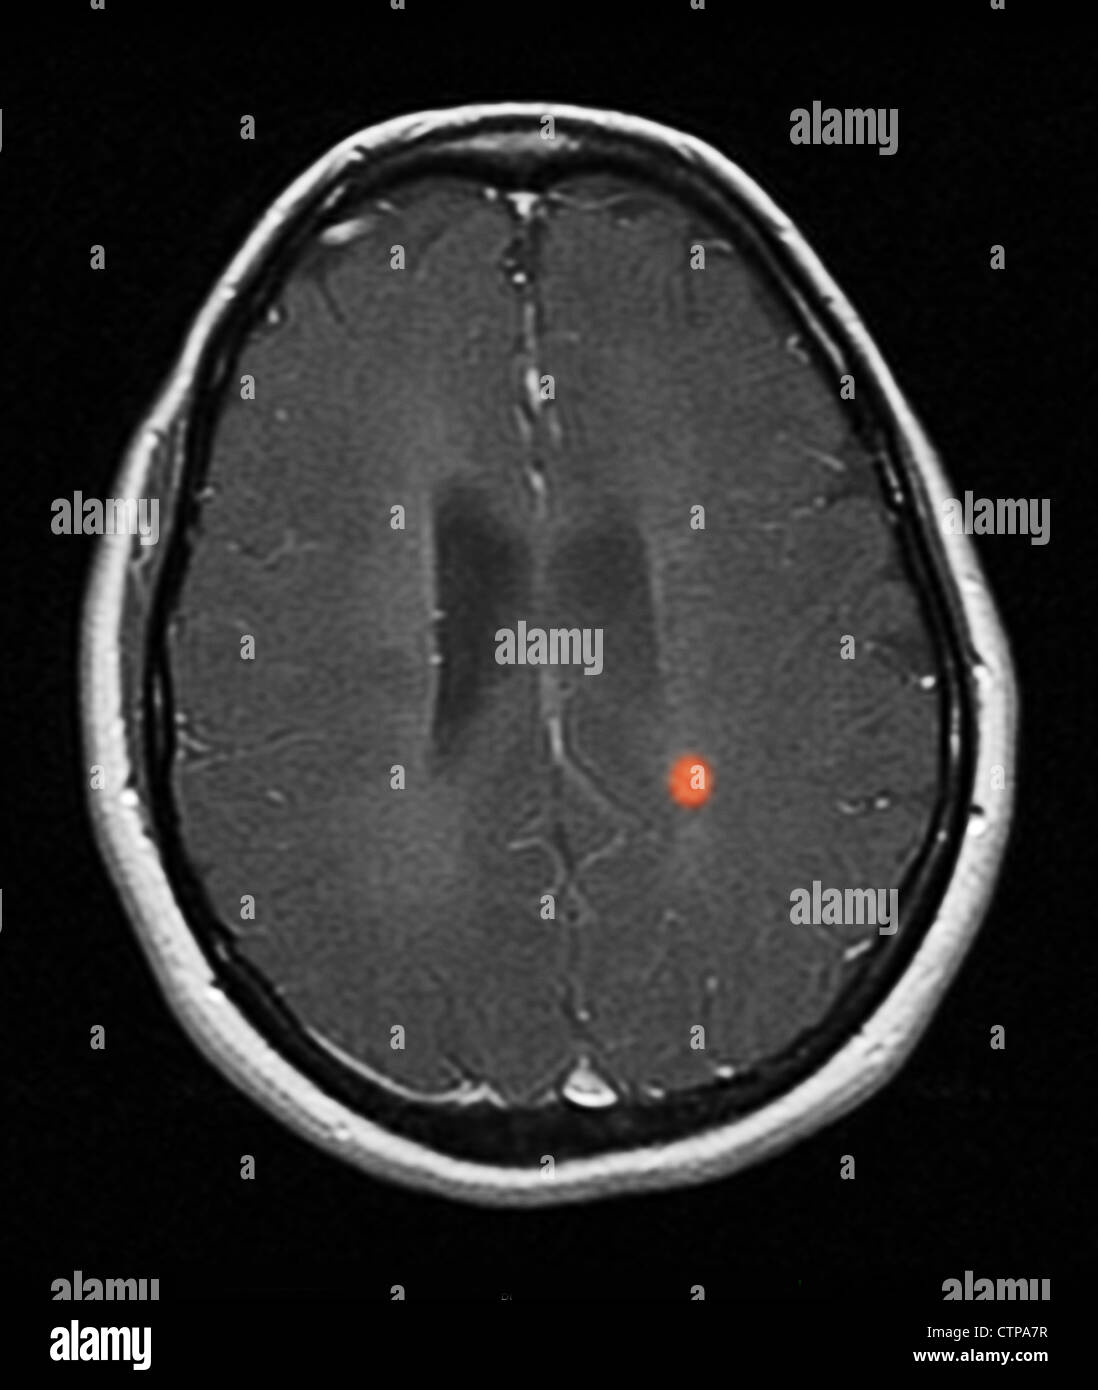 MRI showing multiple sclerosis in a 42 year old woman Stock Photo